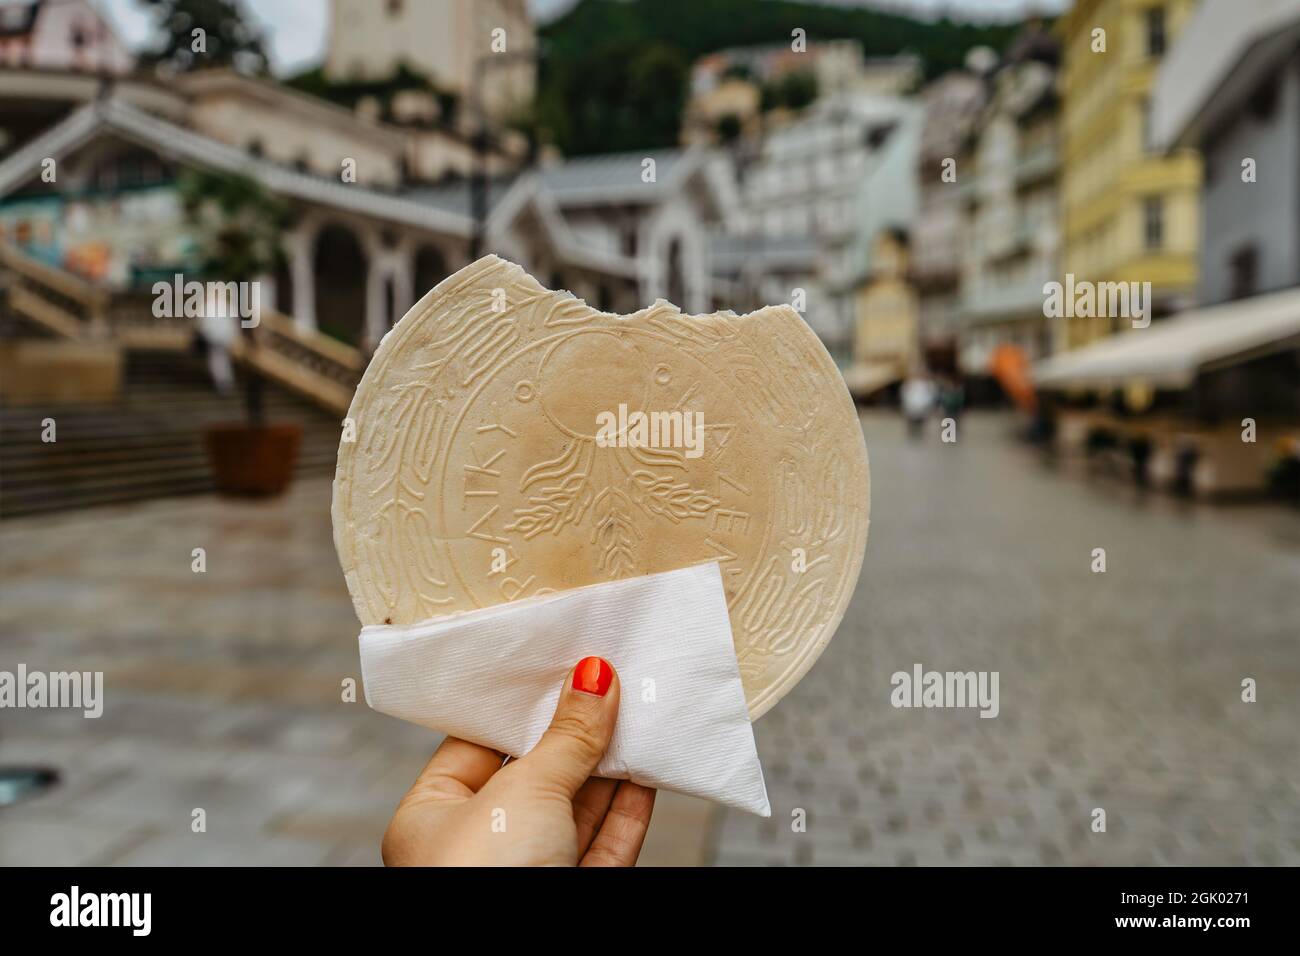 Famous Carlsbad wafer,CZ: lazenske oplatky, originated in 1867. Woman hand holding traditional Czech sweet cookie snack made in Karlovy Vary, famous s Stock Photo